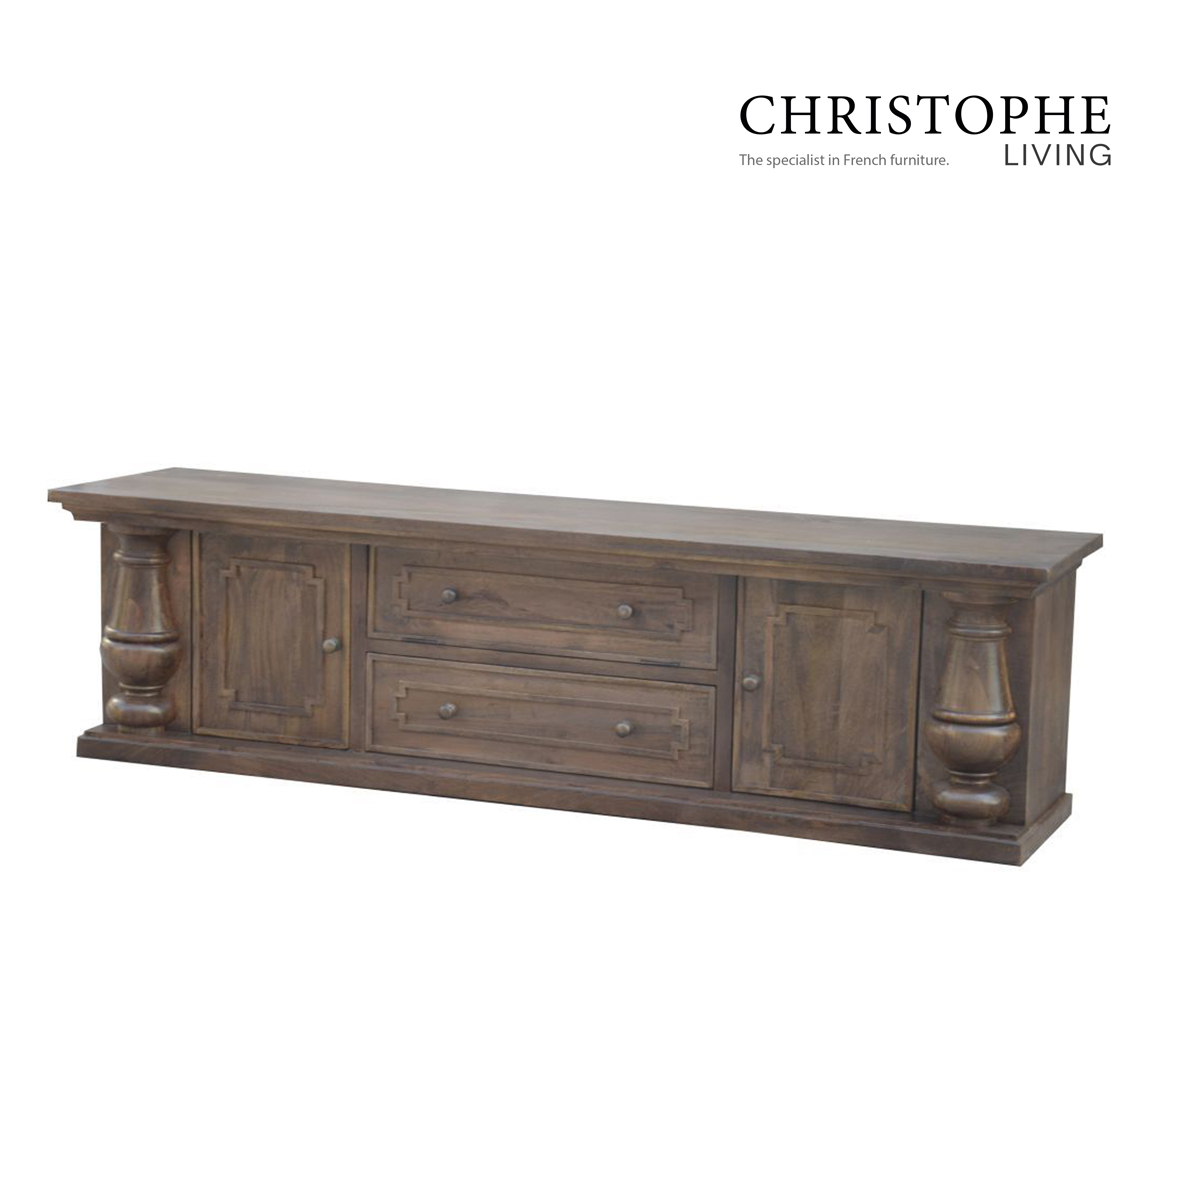 Valentino French Provincial Living Room TV Unit in Walnut Grey with Solid Mango Timber